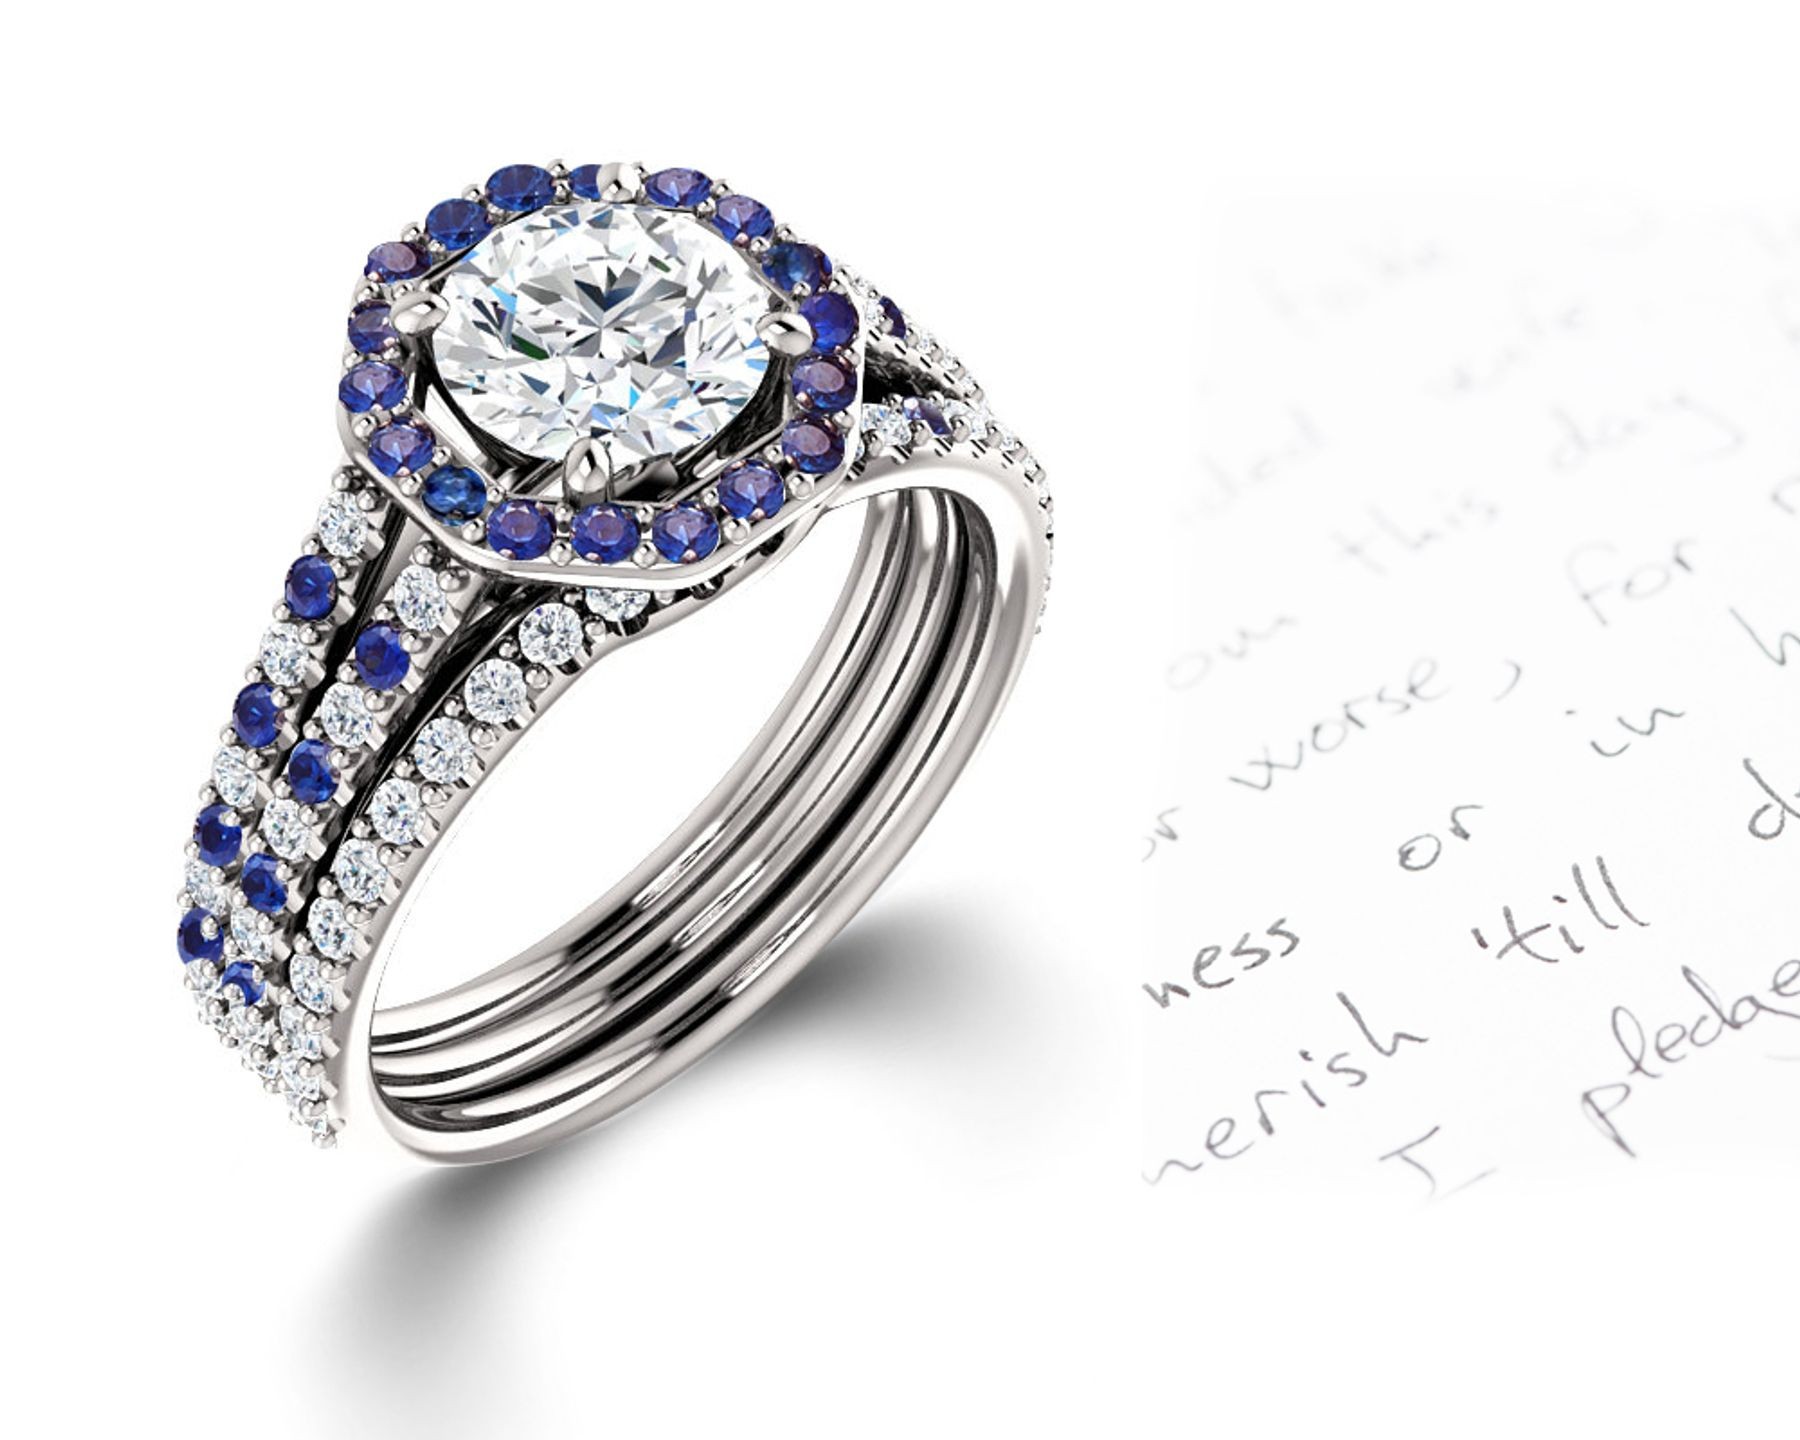 Vibrant Blue Sapphires and Diamonds Halo Micropave Engagement Rings With Vivid Colored Gemstone Accents